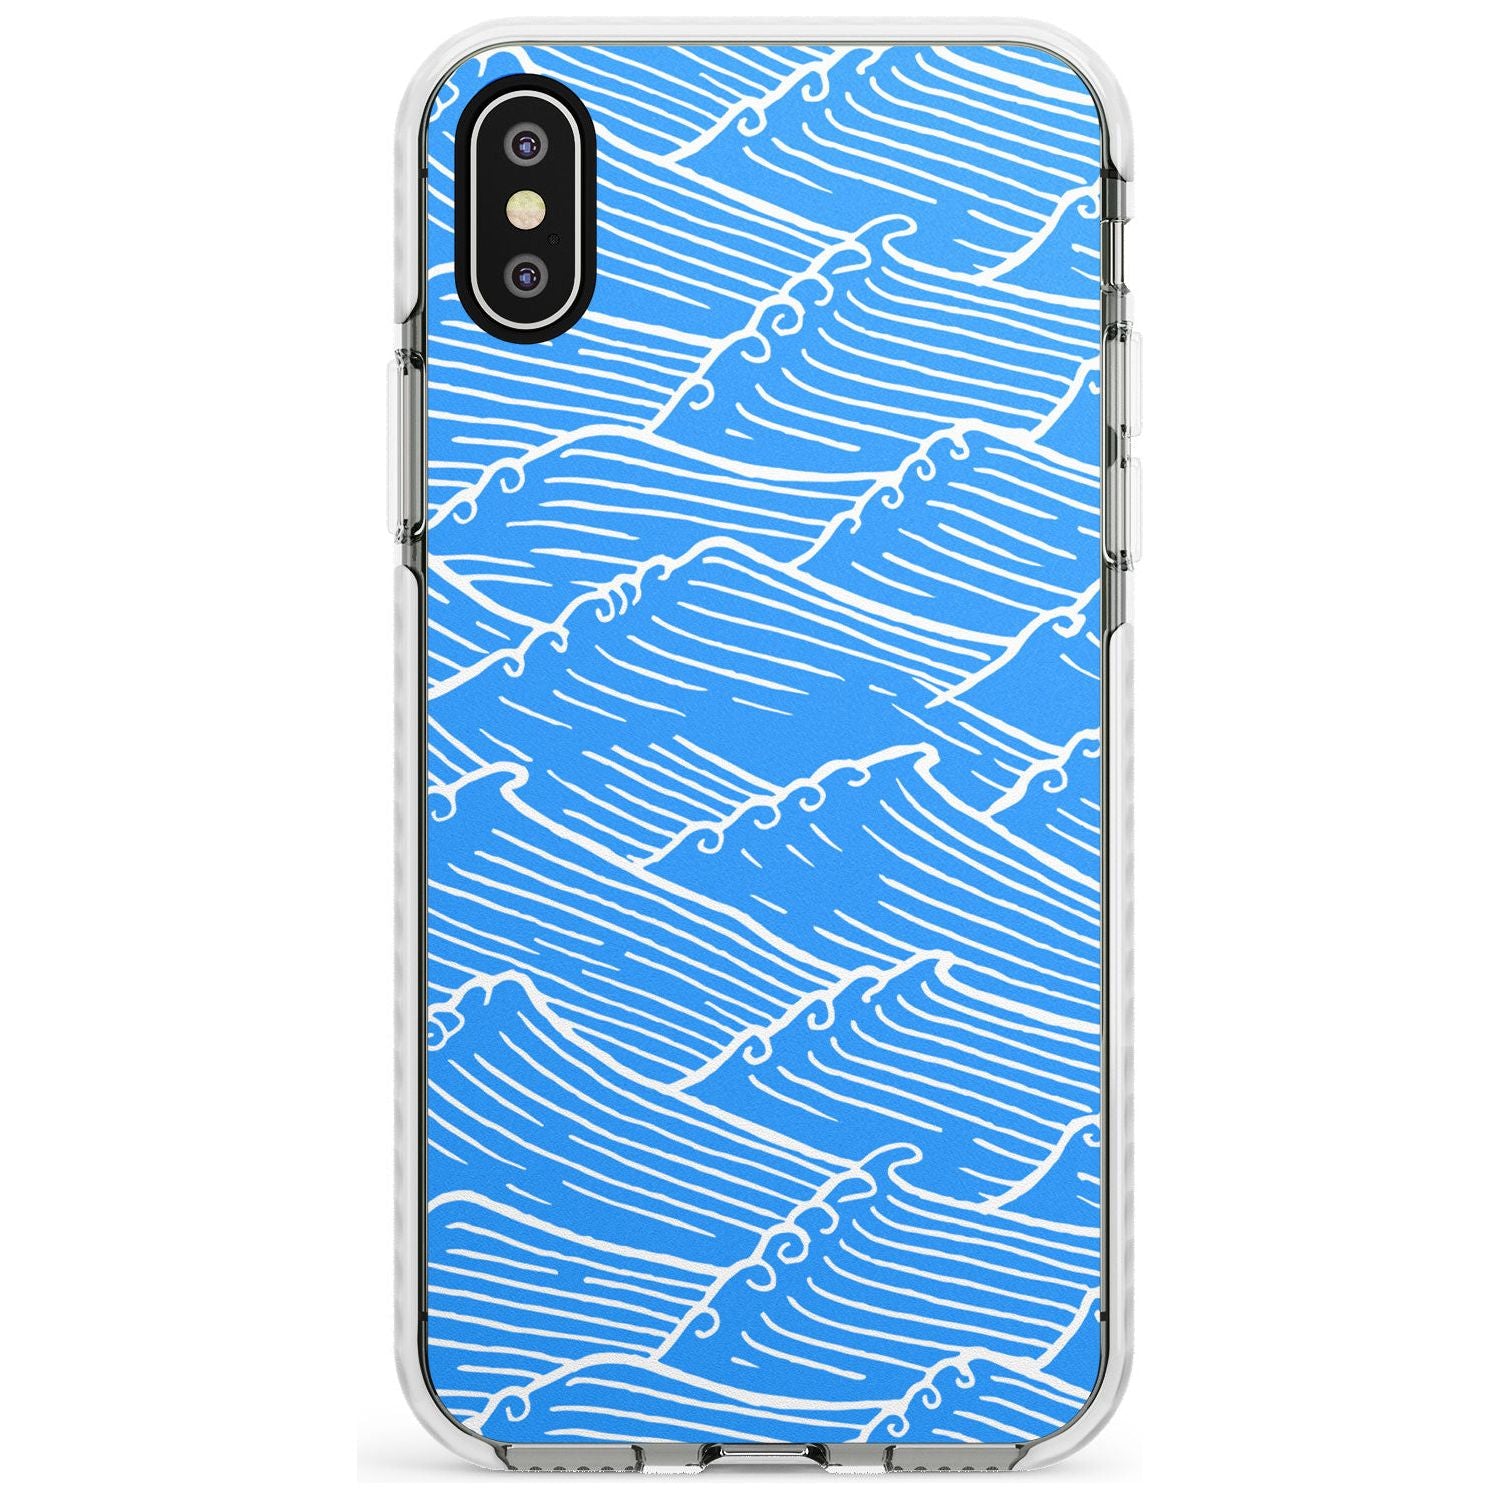 Waves Pattern Impact Phone Case for iPhone X XS Max XR